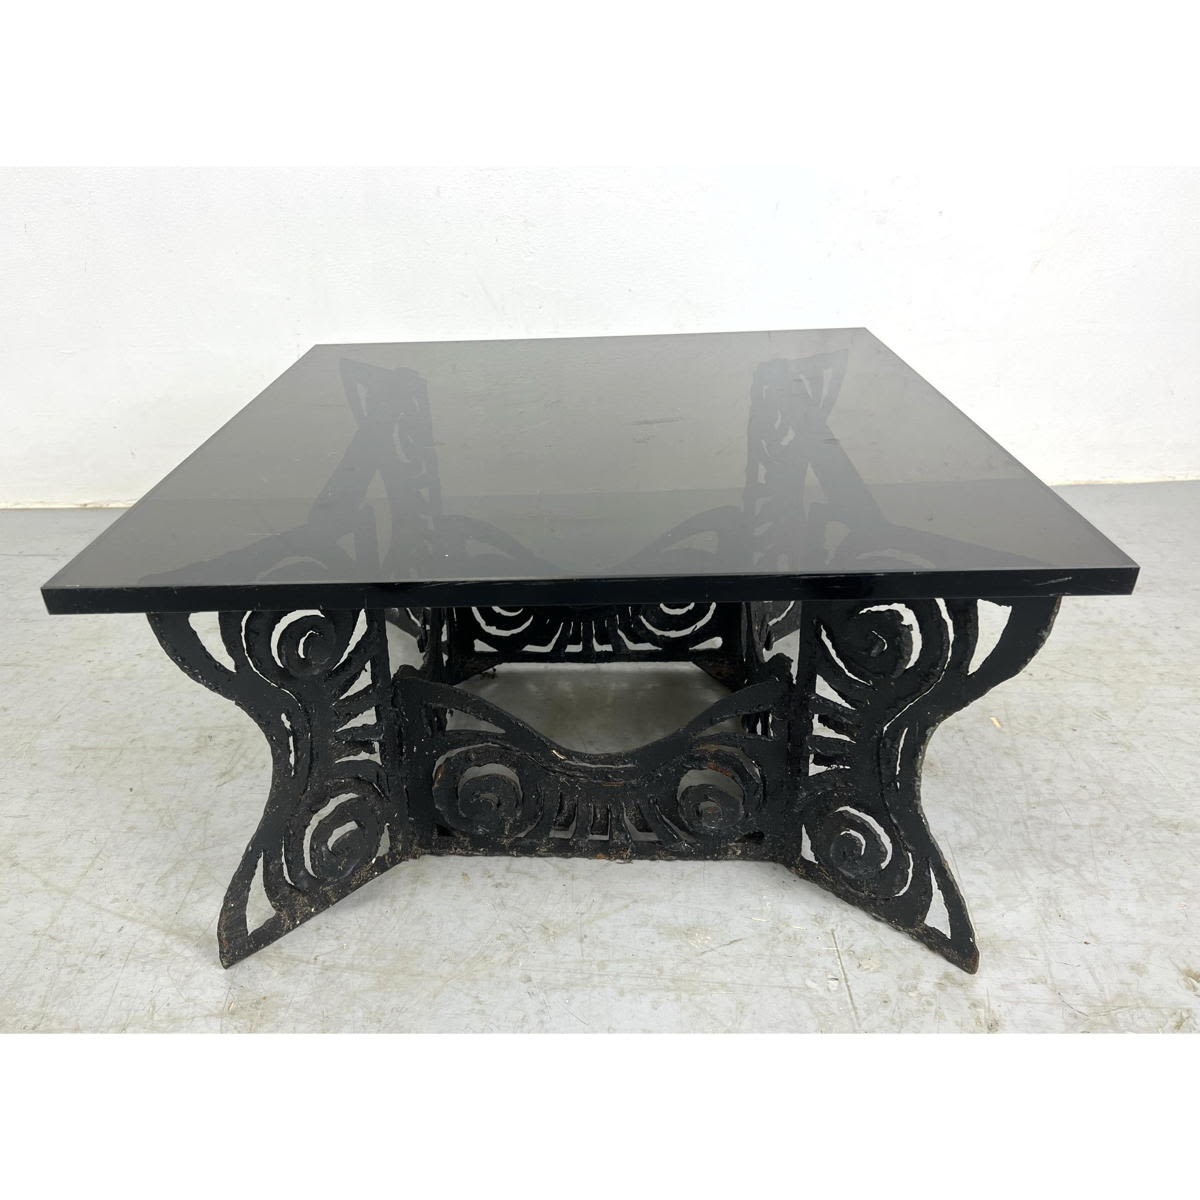 Brutalist Cut Iron Low Table Coffee 30043e